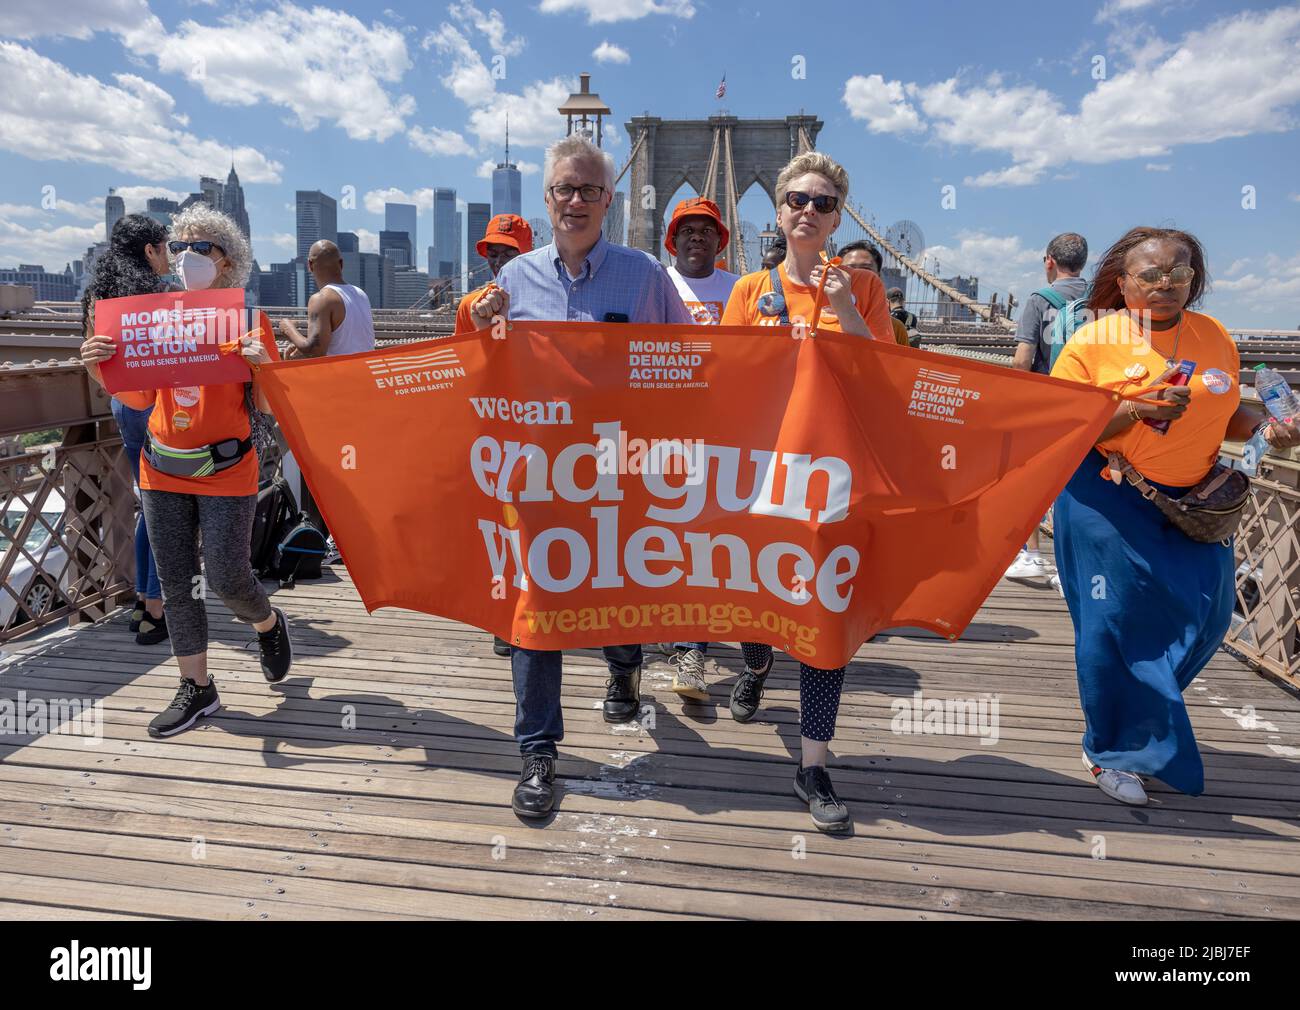 NEW YORK, N.Y. – June 4, 2022: New York State Senator Brian Kavanagh (D), middle-left, marches with gun violence prevention demonstrators. Stock Photo